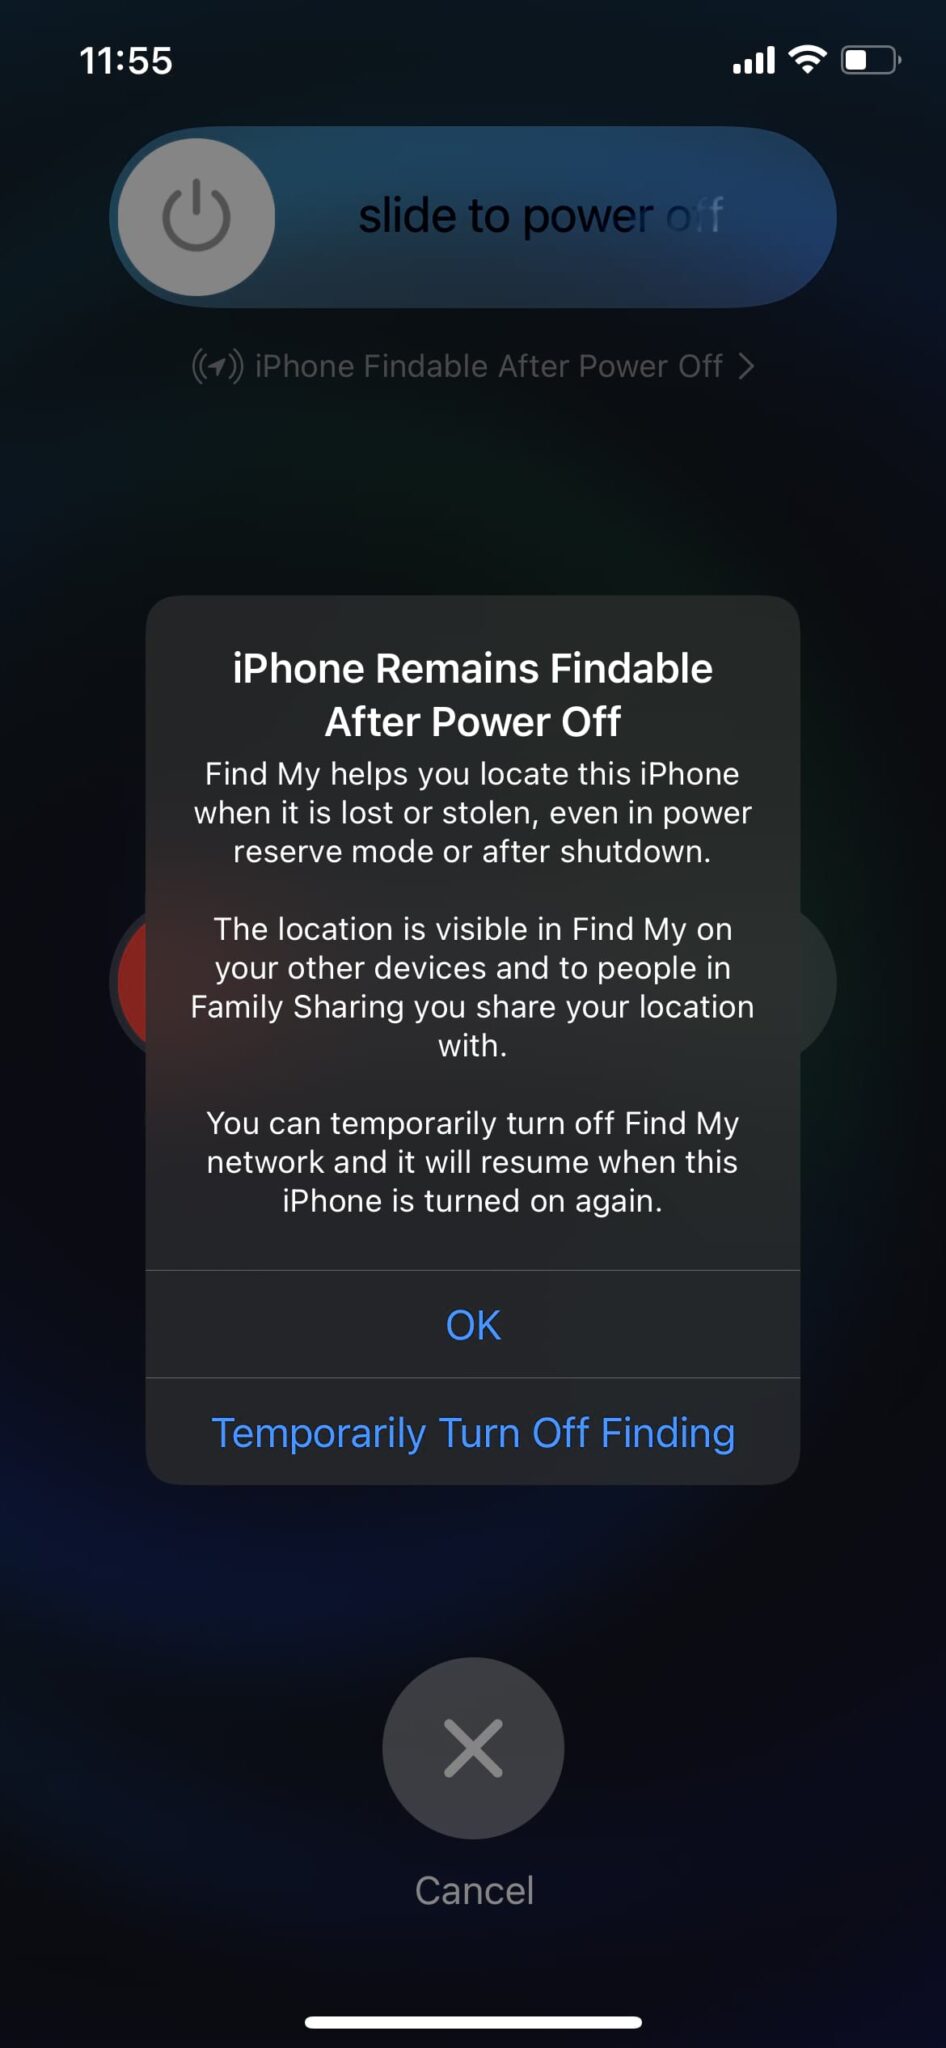 iphone-findable-after-power-off-setting-ios-15-scaled